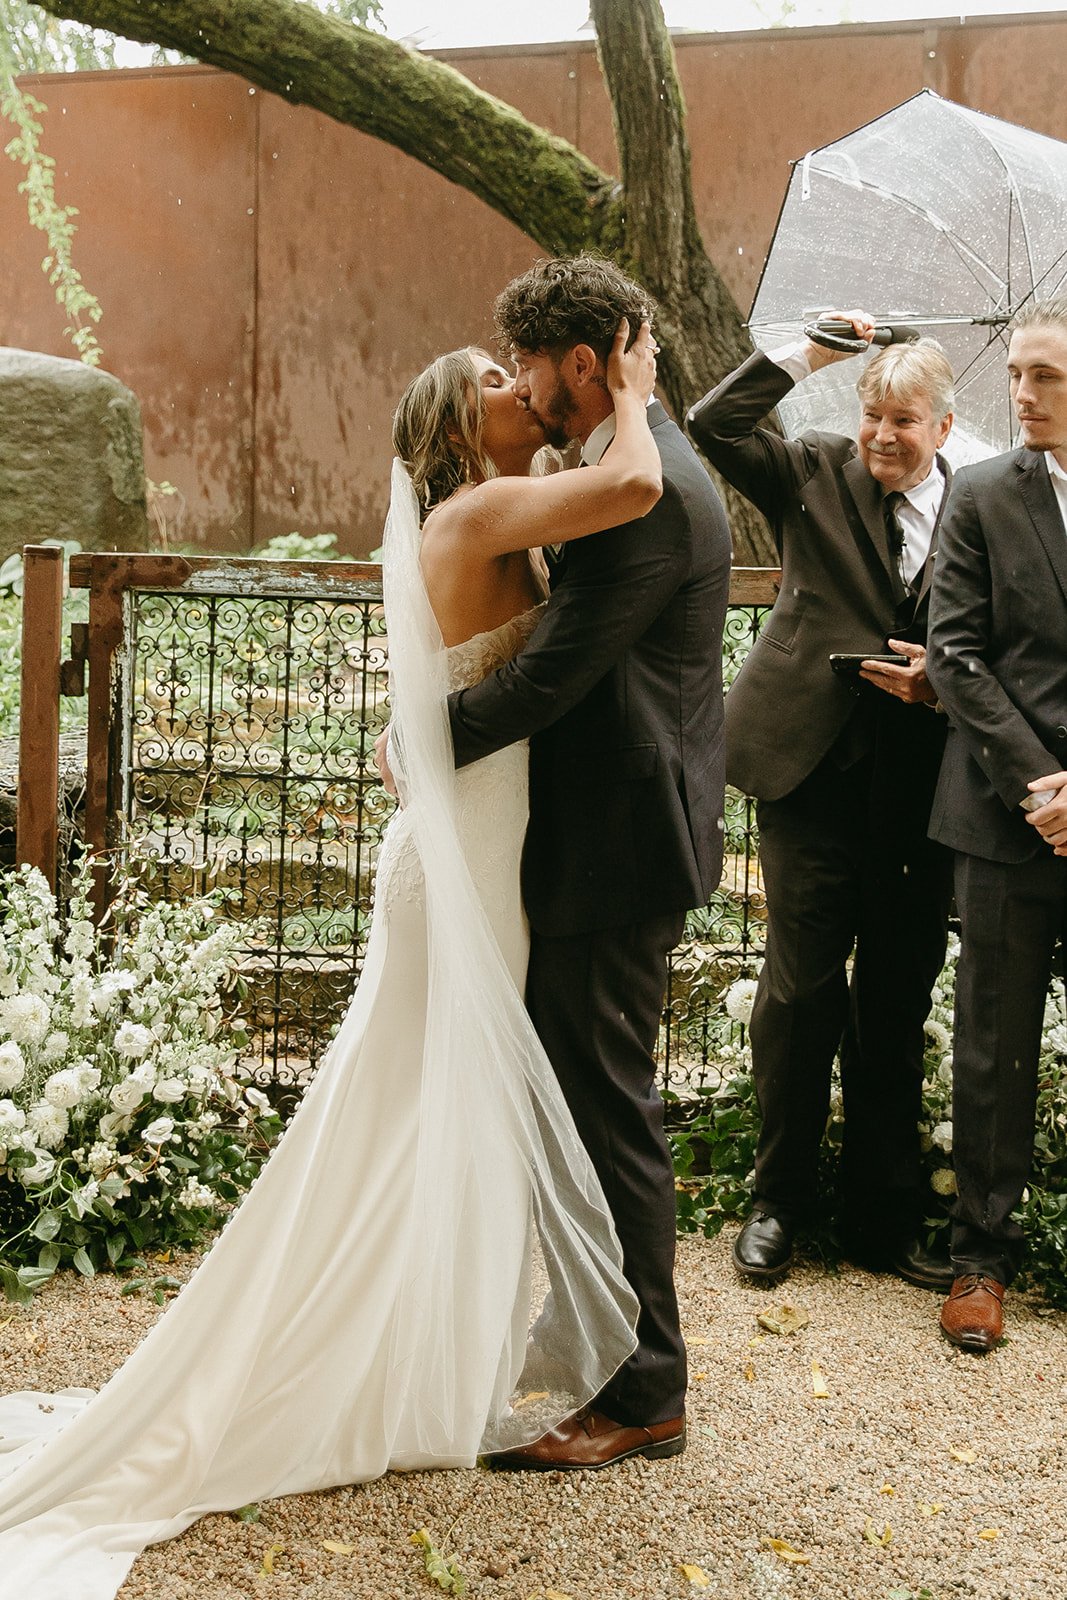 Bride and groom kissing during outdoor wedding ceremony